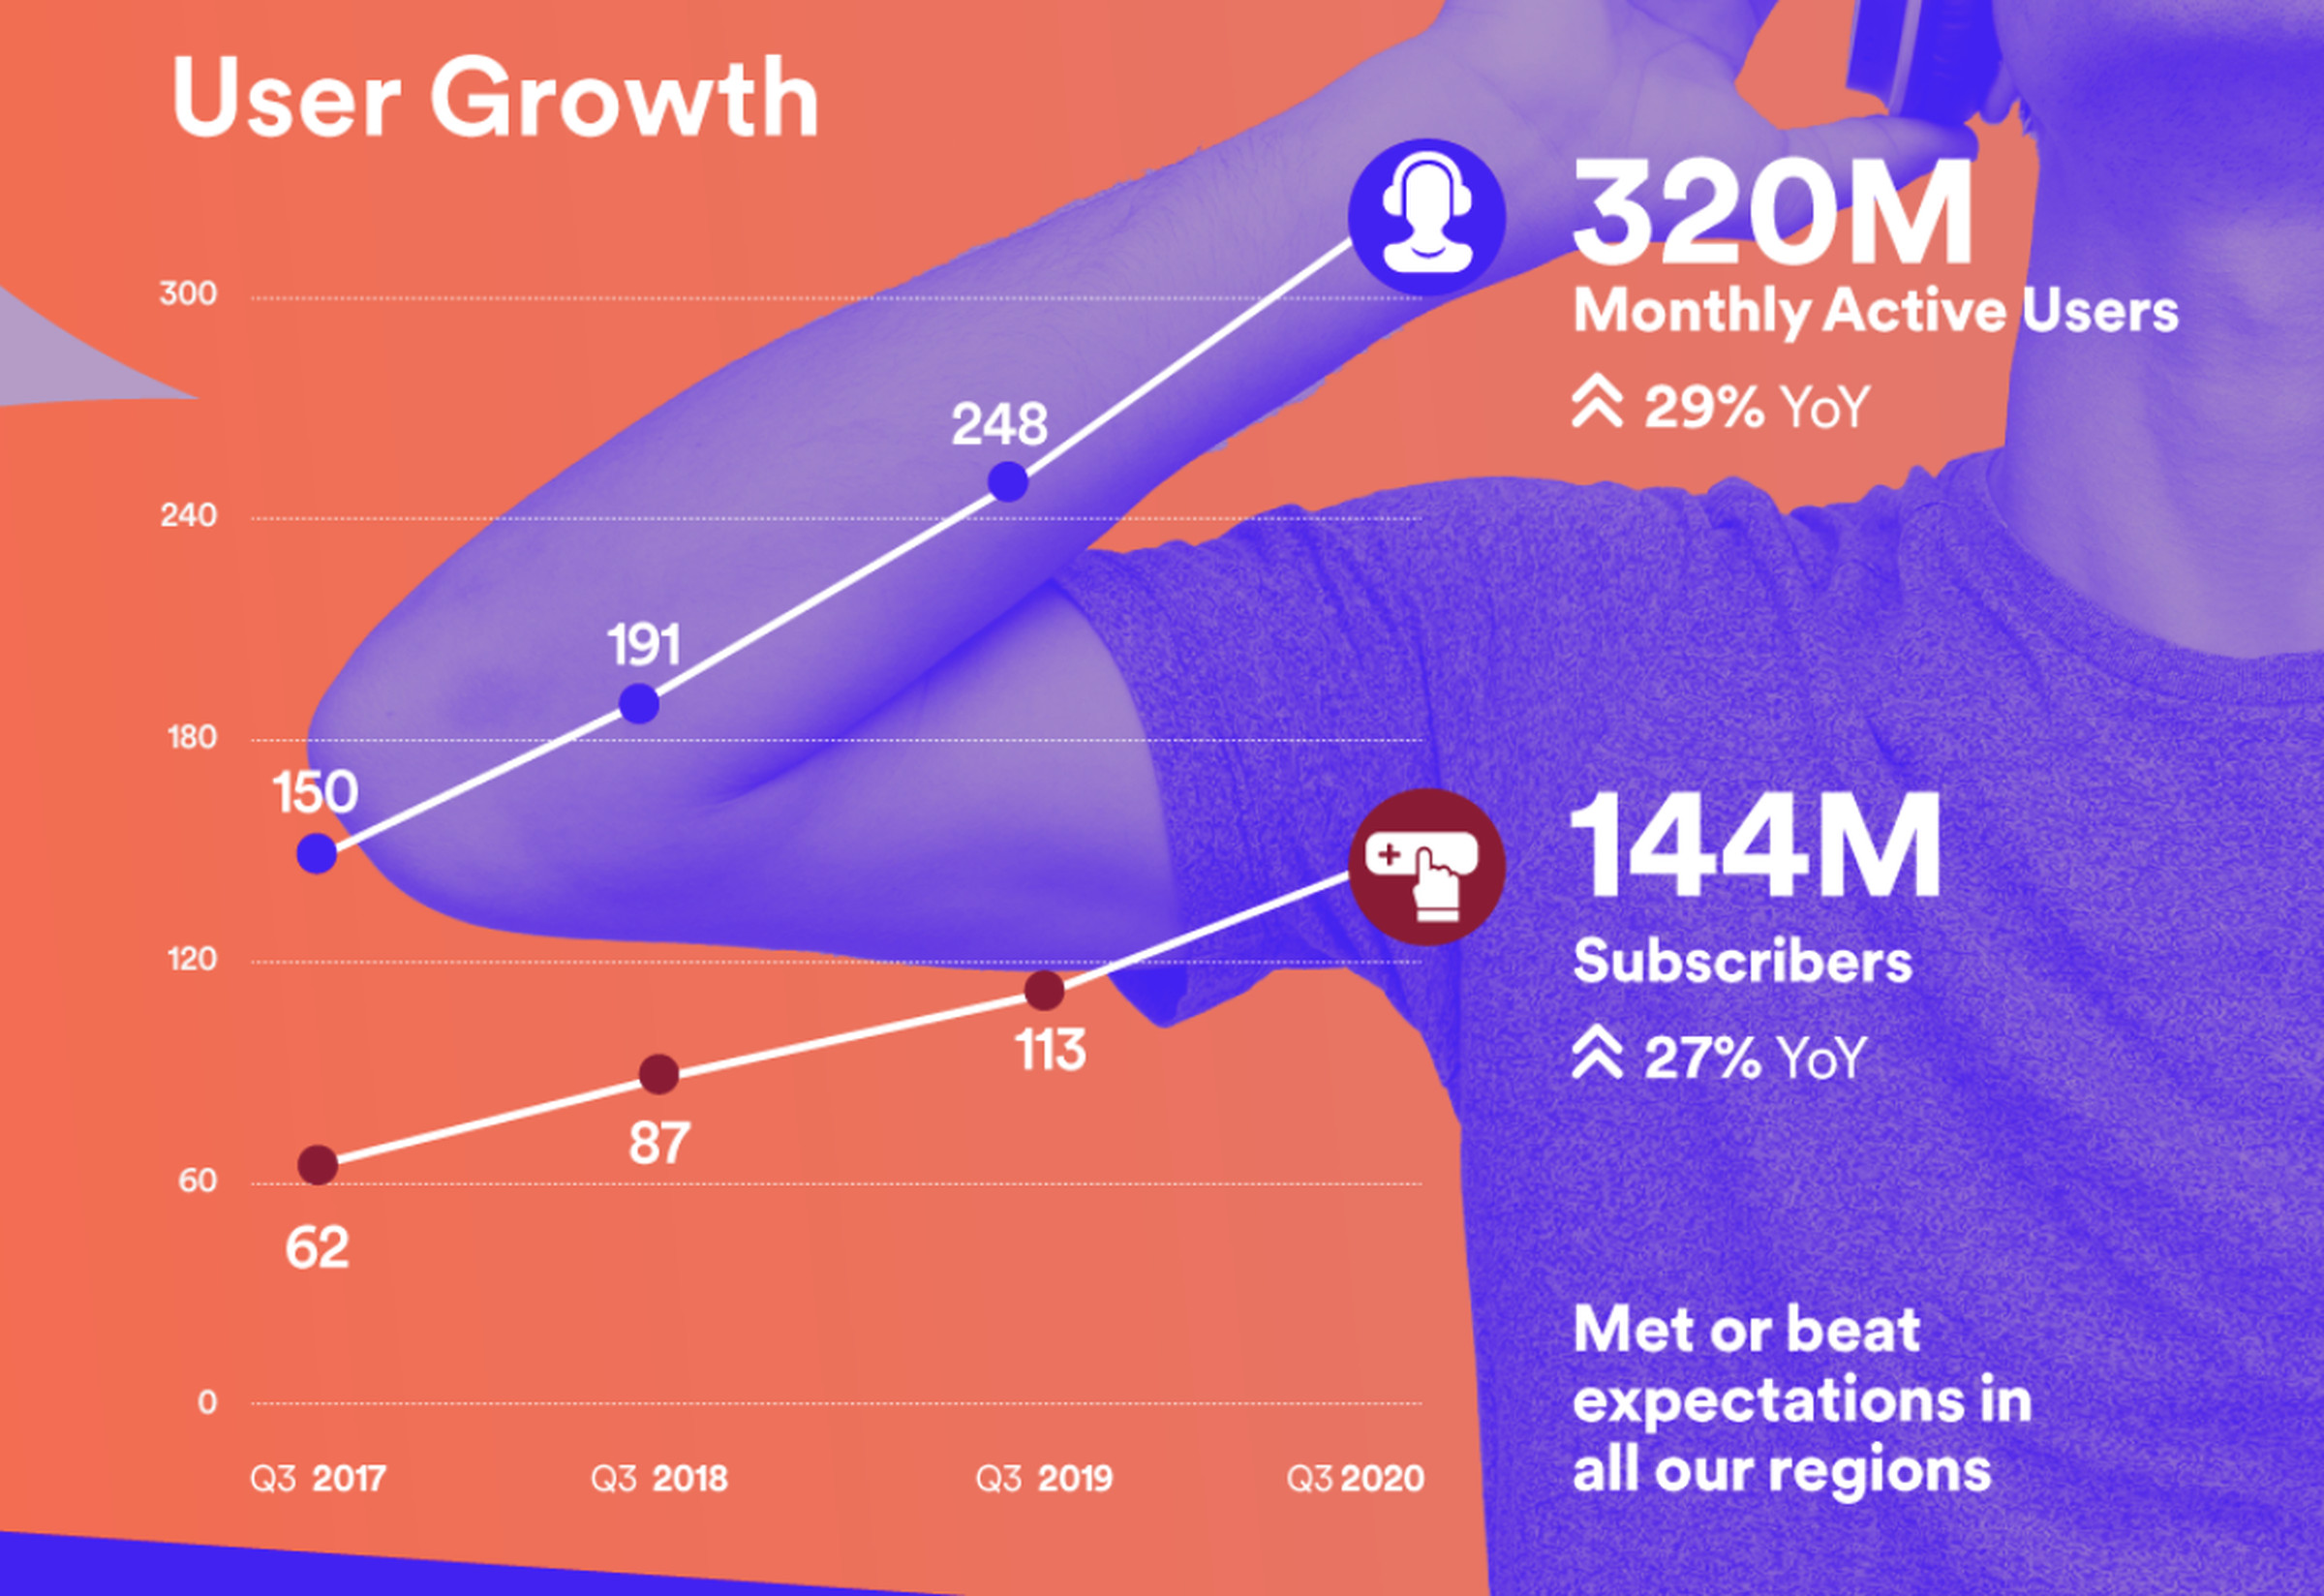 Spotify user growth continues unabated. 